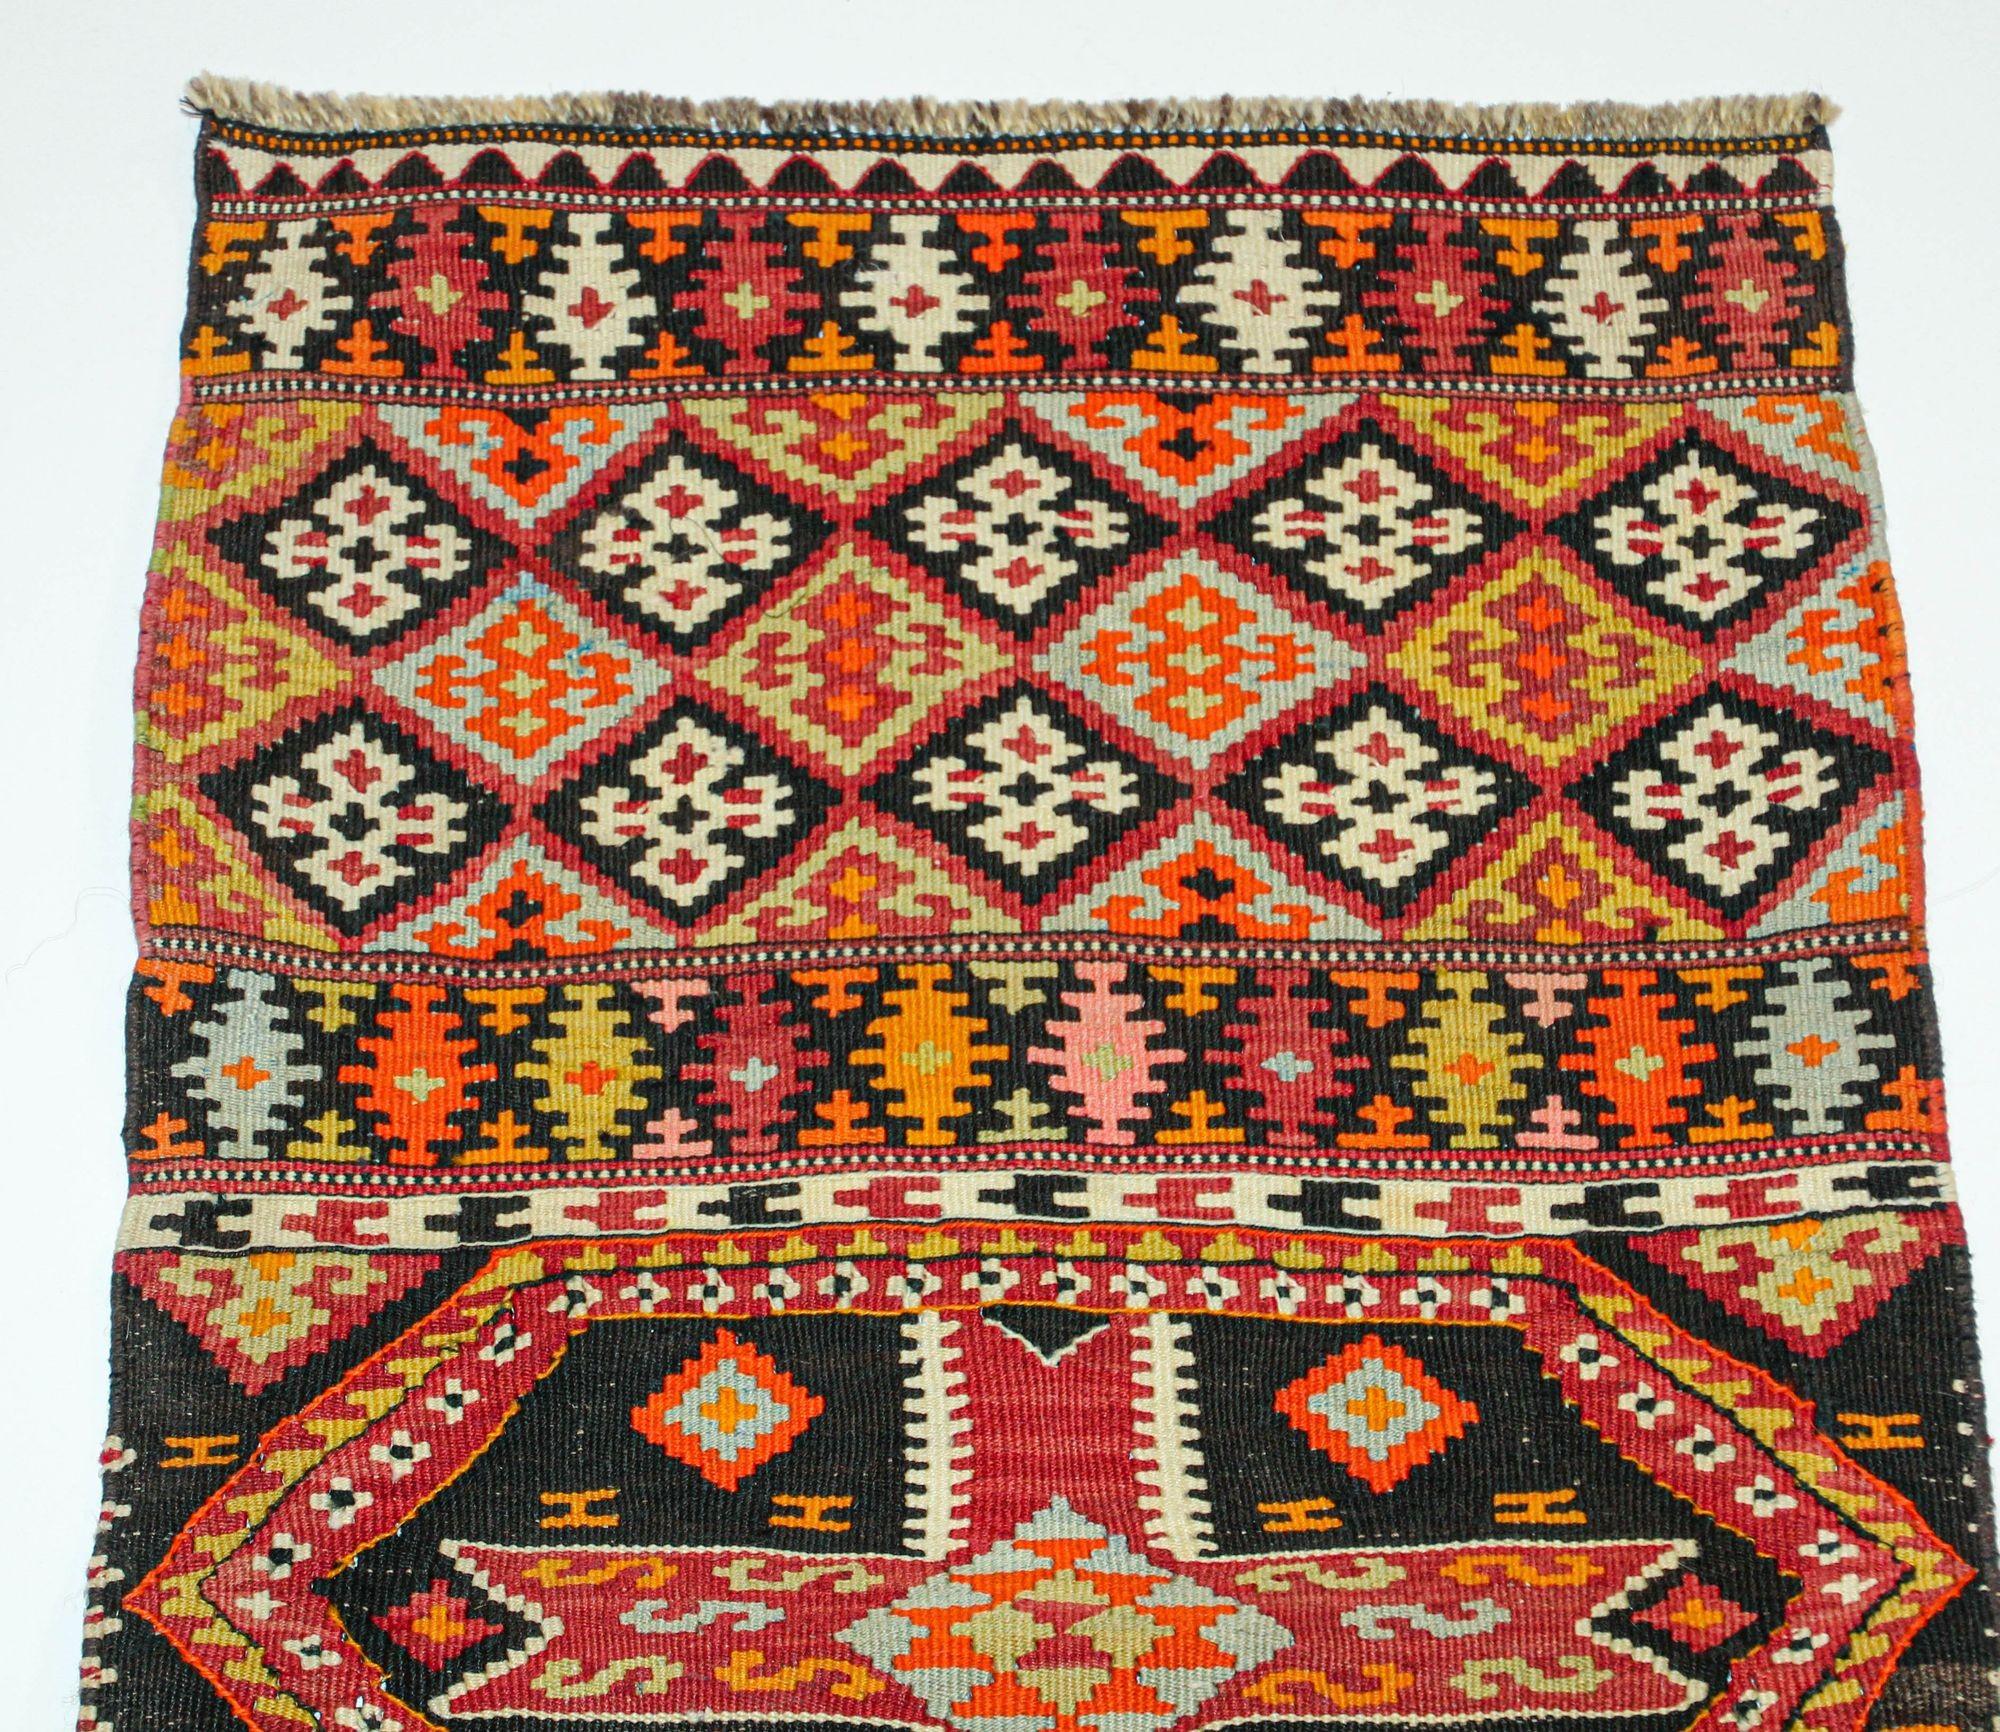 Vintage Malatya Kilim South Anatolia Nomadic Rug Turkish Carpet.
Southern Anatolian Antique Kilim from the Malatya region with a rare and beautiful color composition. 
The brocaded bands cross the entire width of the field forming panels contained